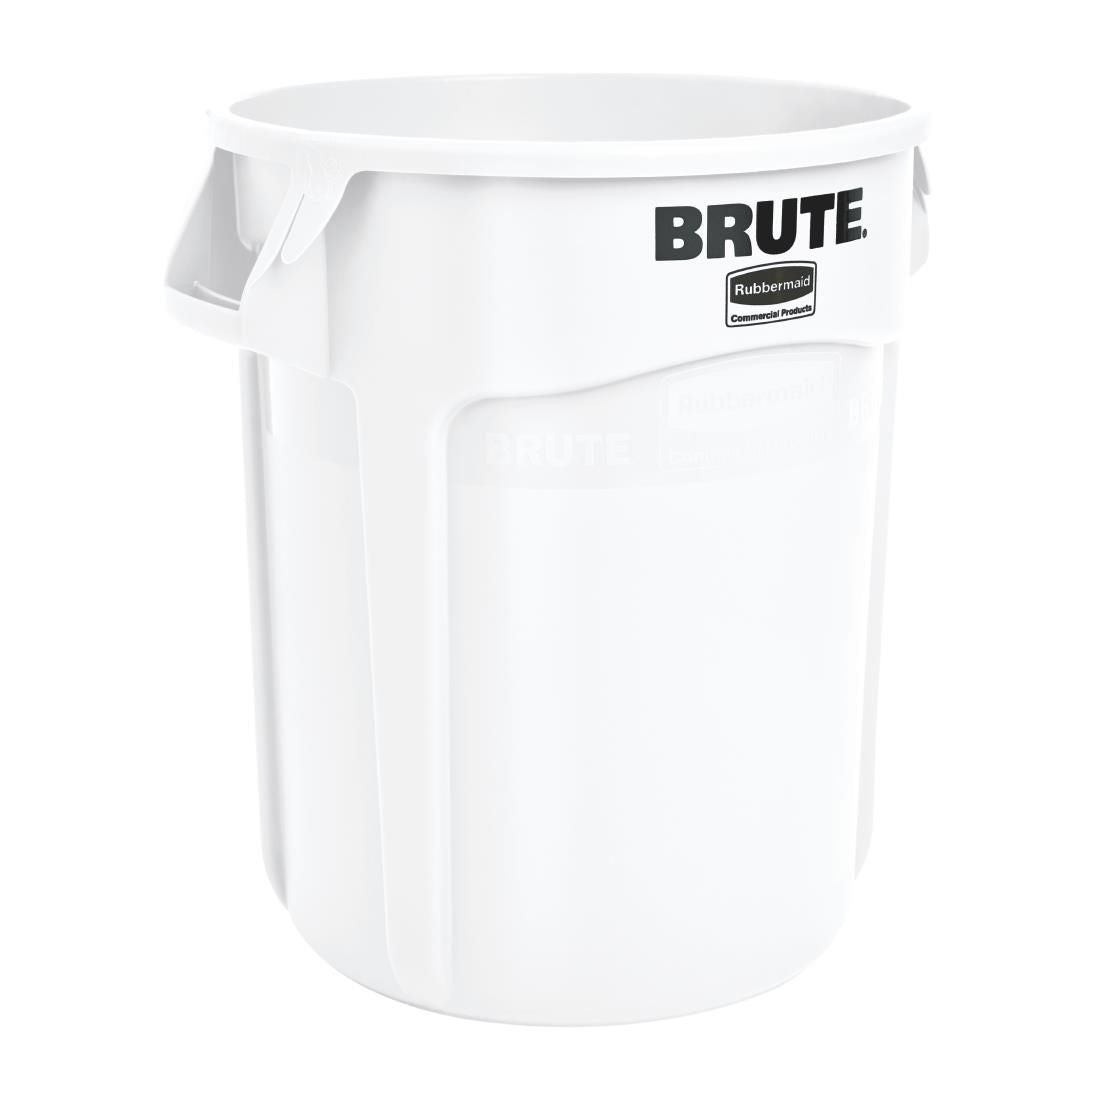 L652 Rubbermaid Round Brute Container 75.7Ltr Container White